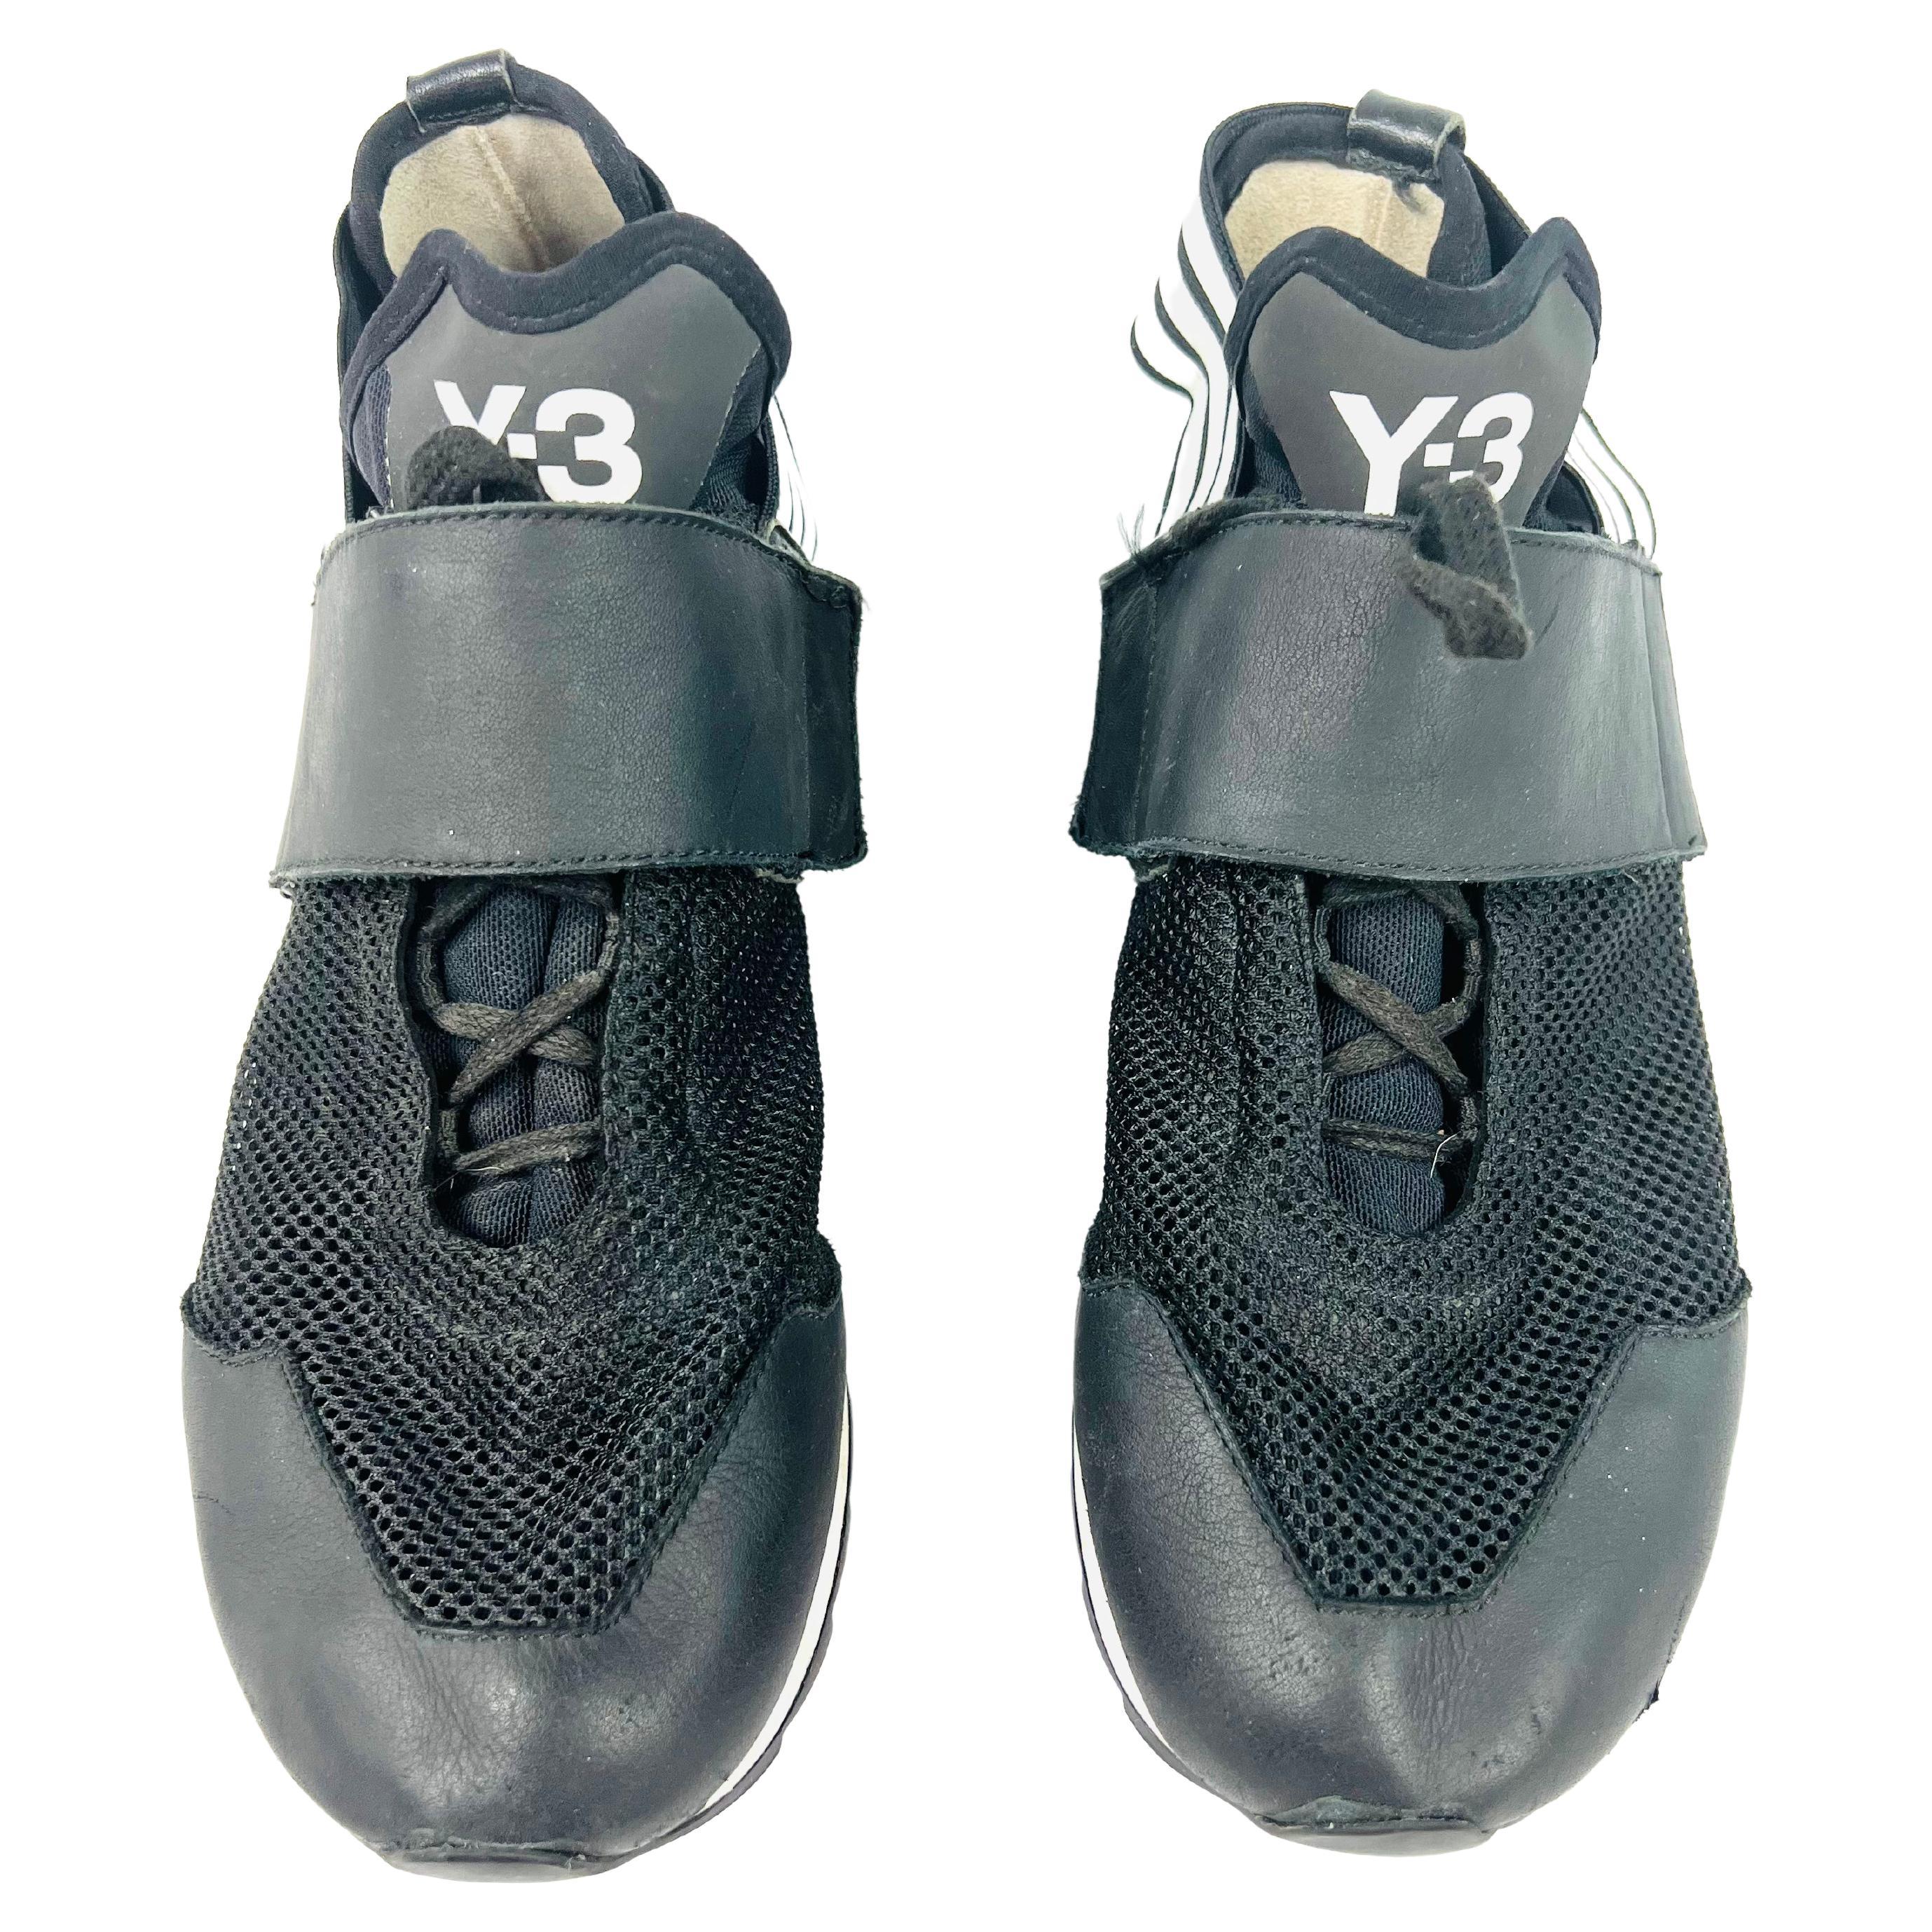 Y-3 Rhita Sport Black and White Sneakers, Size 38